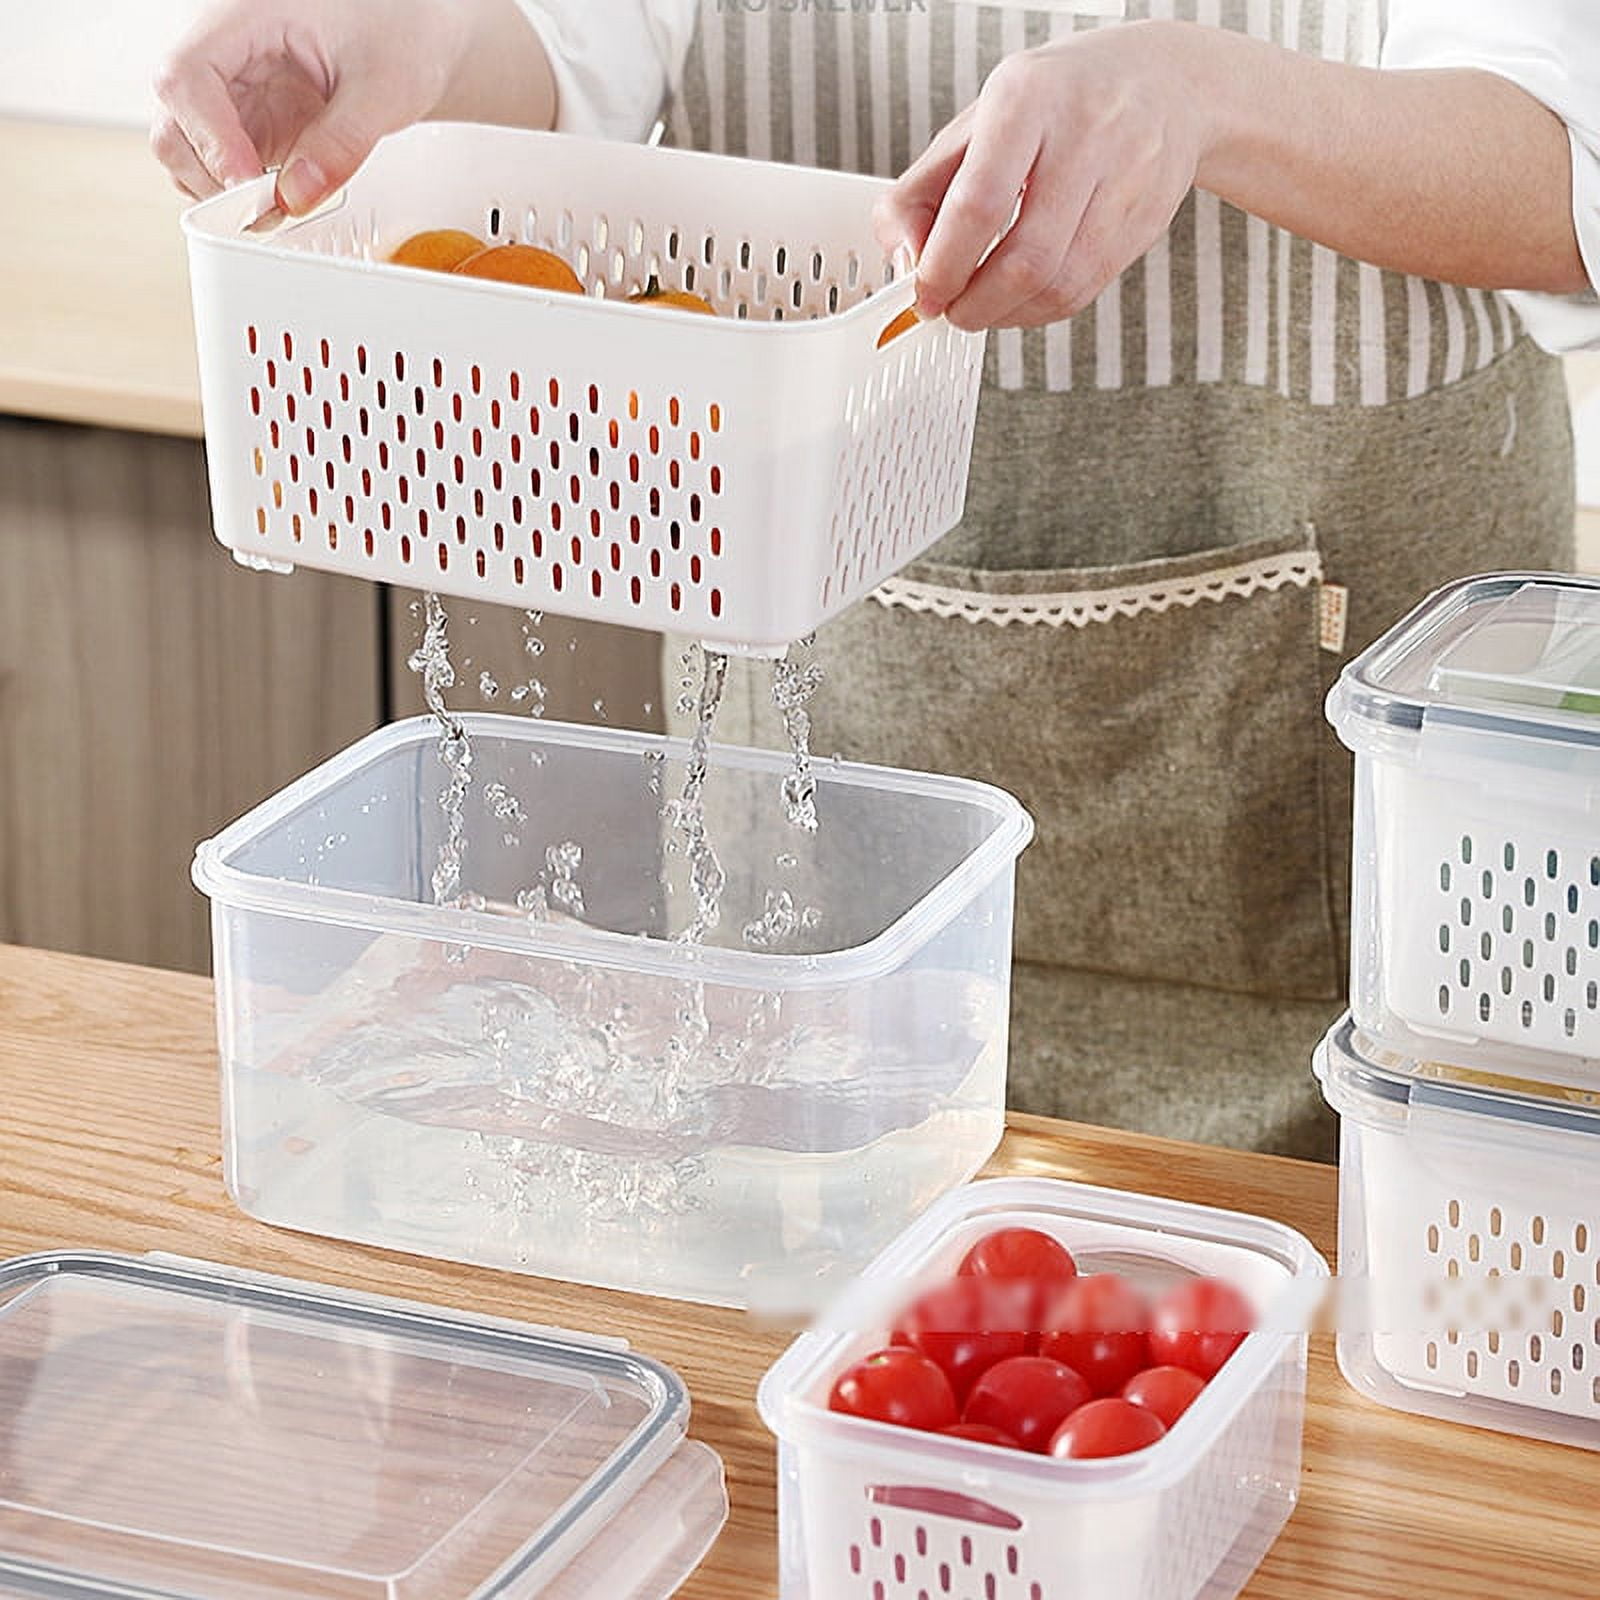 Aagglly 3 PCS Produce saver containers for refrigerator,Leakproof Food  Storage Bins with lids Removable Colander,BPA-Free Fresh Plastic box Keep  Fruit